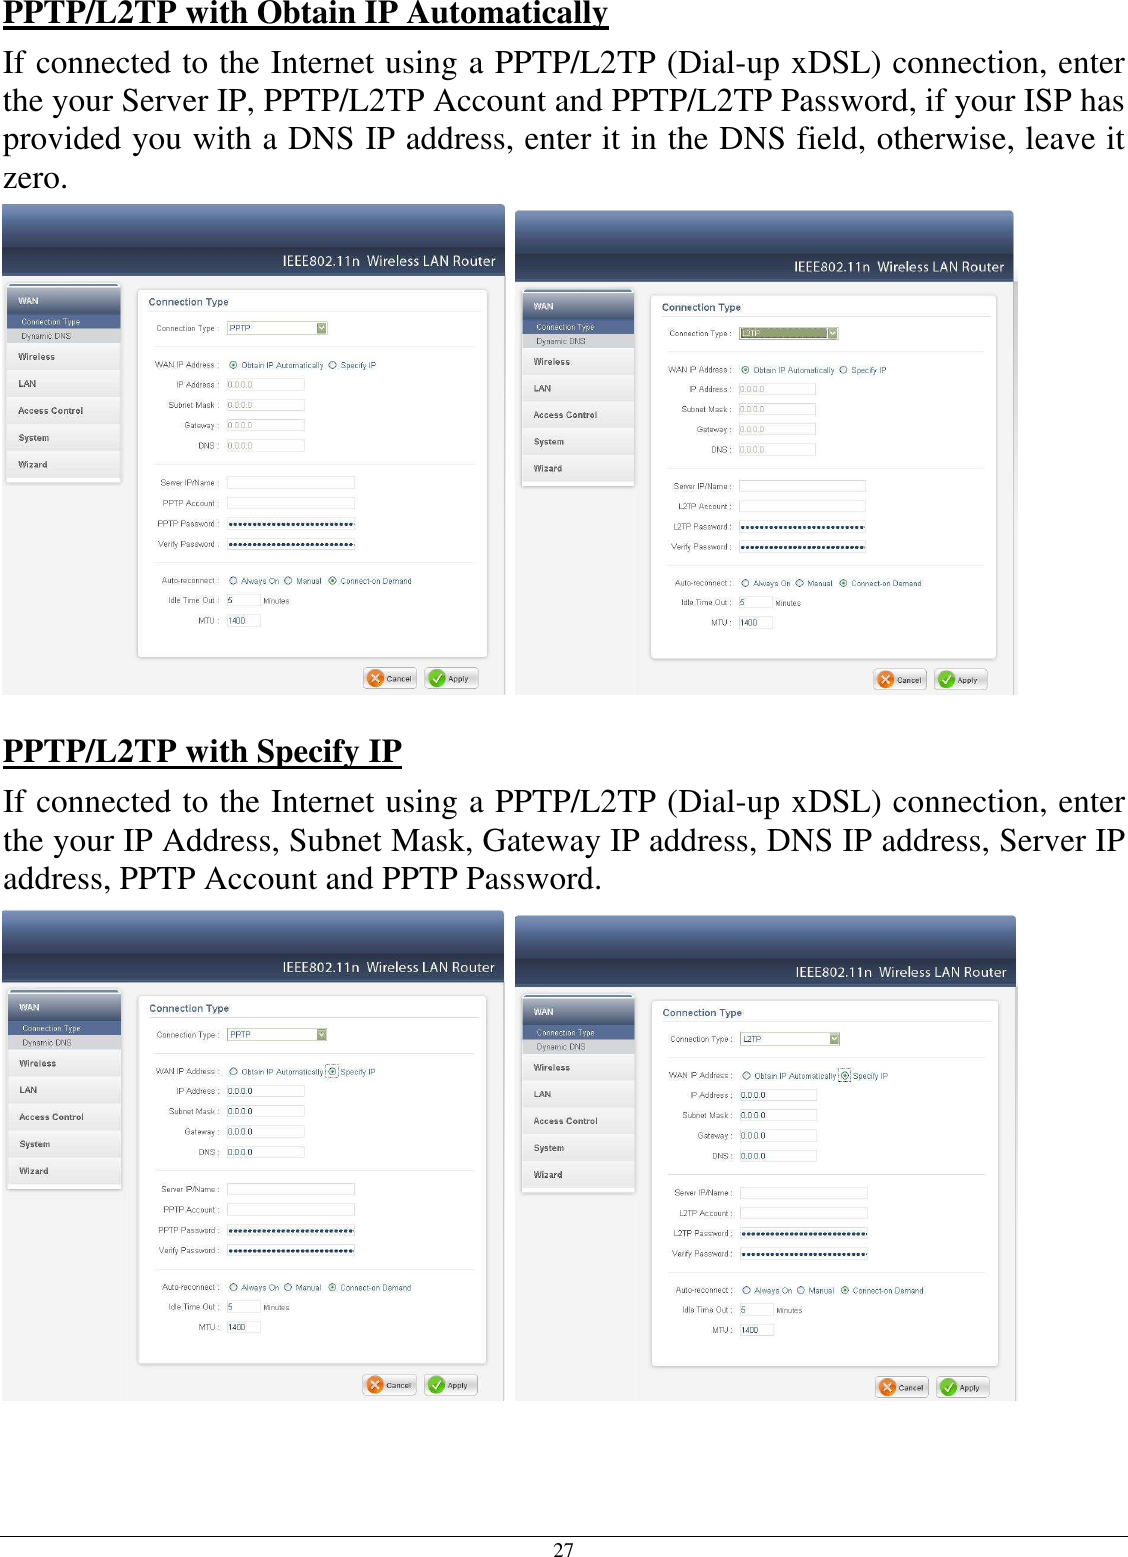 27 PPTP/L2TP with Obtain IP Automatically If connected to the Internet using a PPTP/L2TP (Dial-up xDSL) connection, enter the your Server IP, PPTP/L2TP Account and PPTP/L2TP Password, if your ISP has provided you with a DNS IP address, enter it in the DNS field, otherwise, leave it zero.      PPTP/L2TP with Specify IP If connected to the Internet using a PPTP/L2TP (Dial-up xDSL) connection, enter the your IP Address, Subnet Mask, Gateway IP address, DNS IP address, Server IP address, PPTP Account and PPTP Password.     